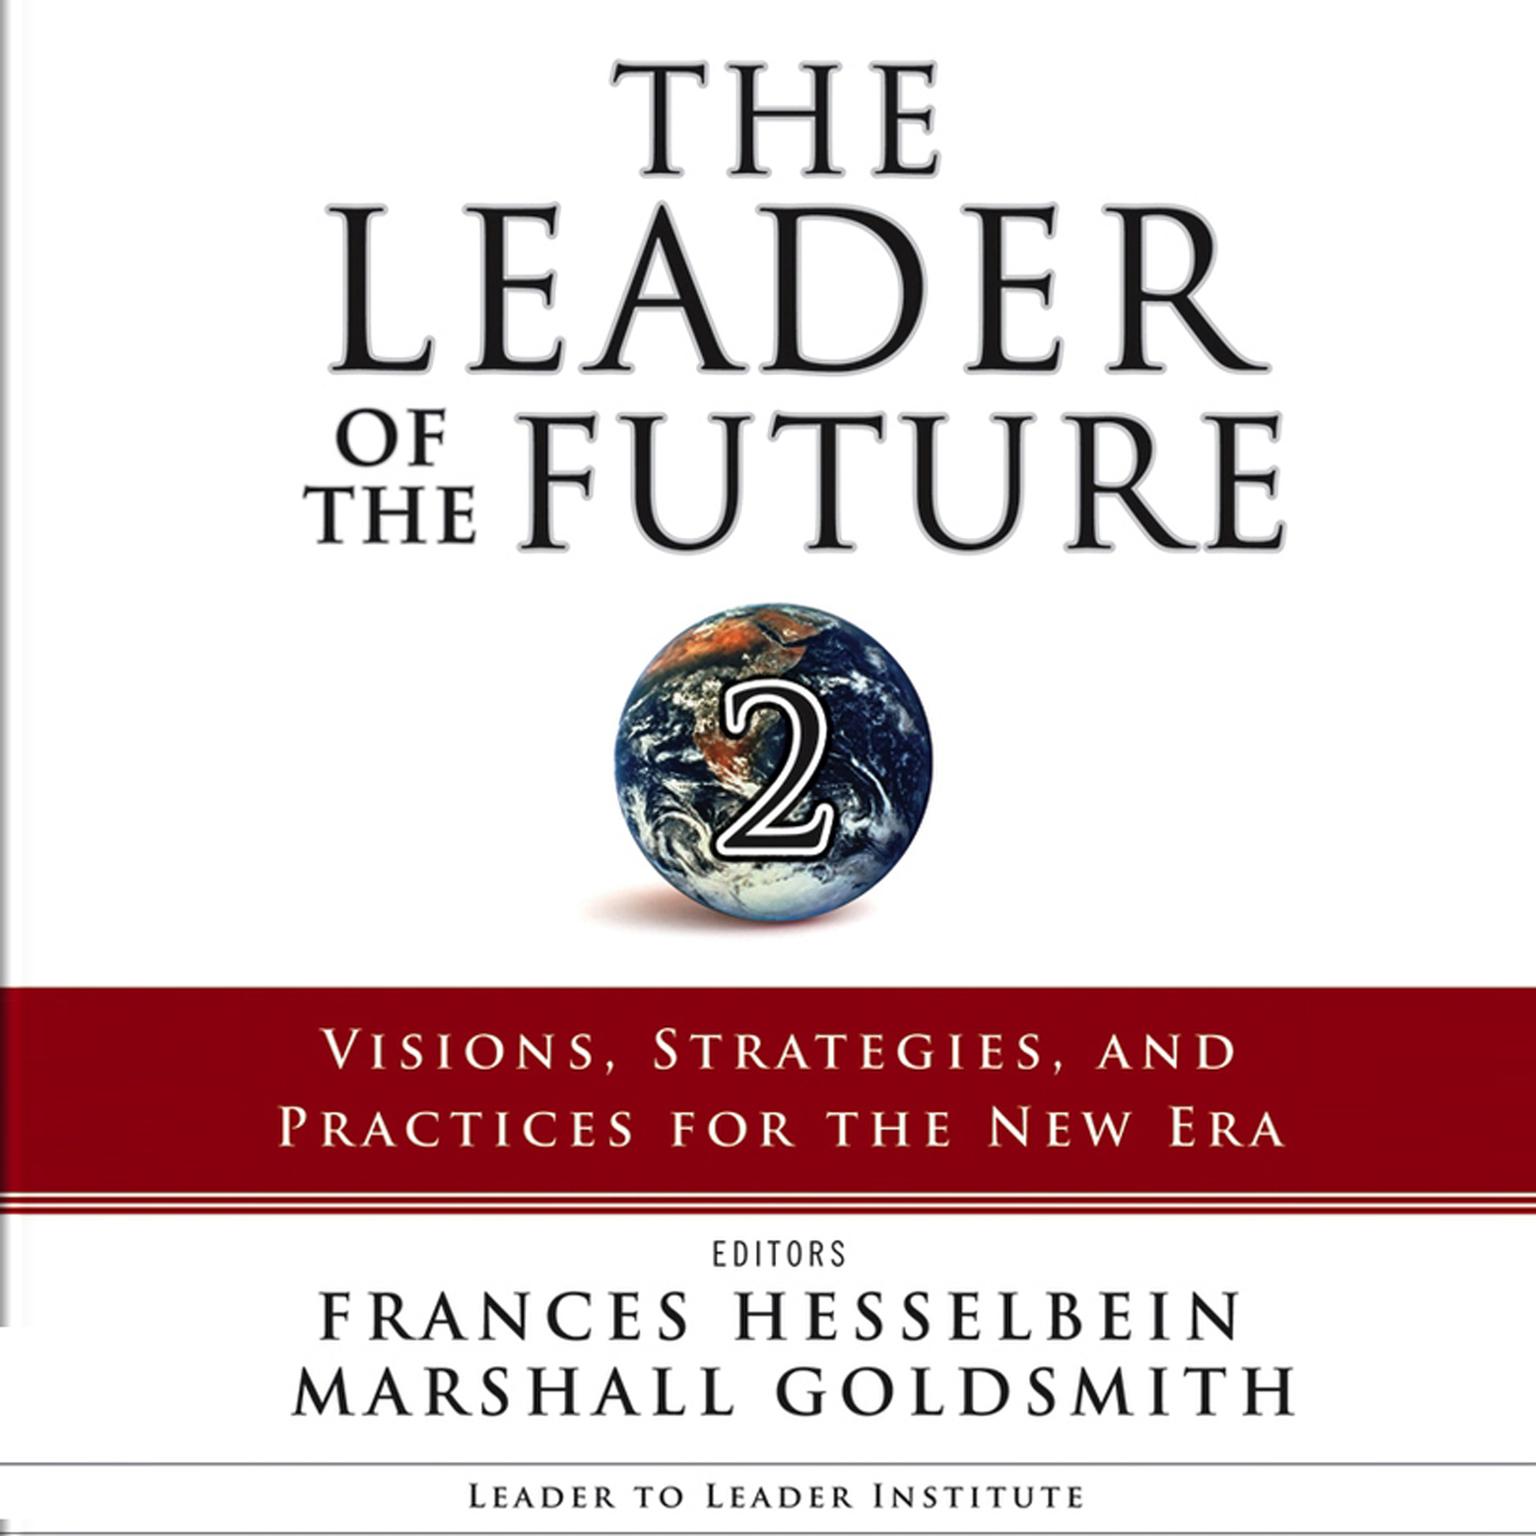 The Leader of the Future 2: Visions, Strategies, and Practices for the New Era Audiobook, by Frances Hesselbein